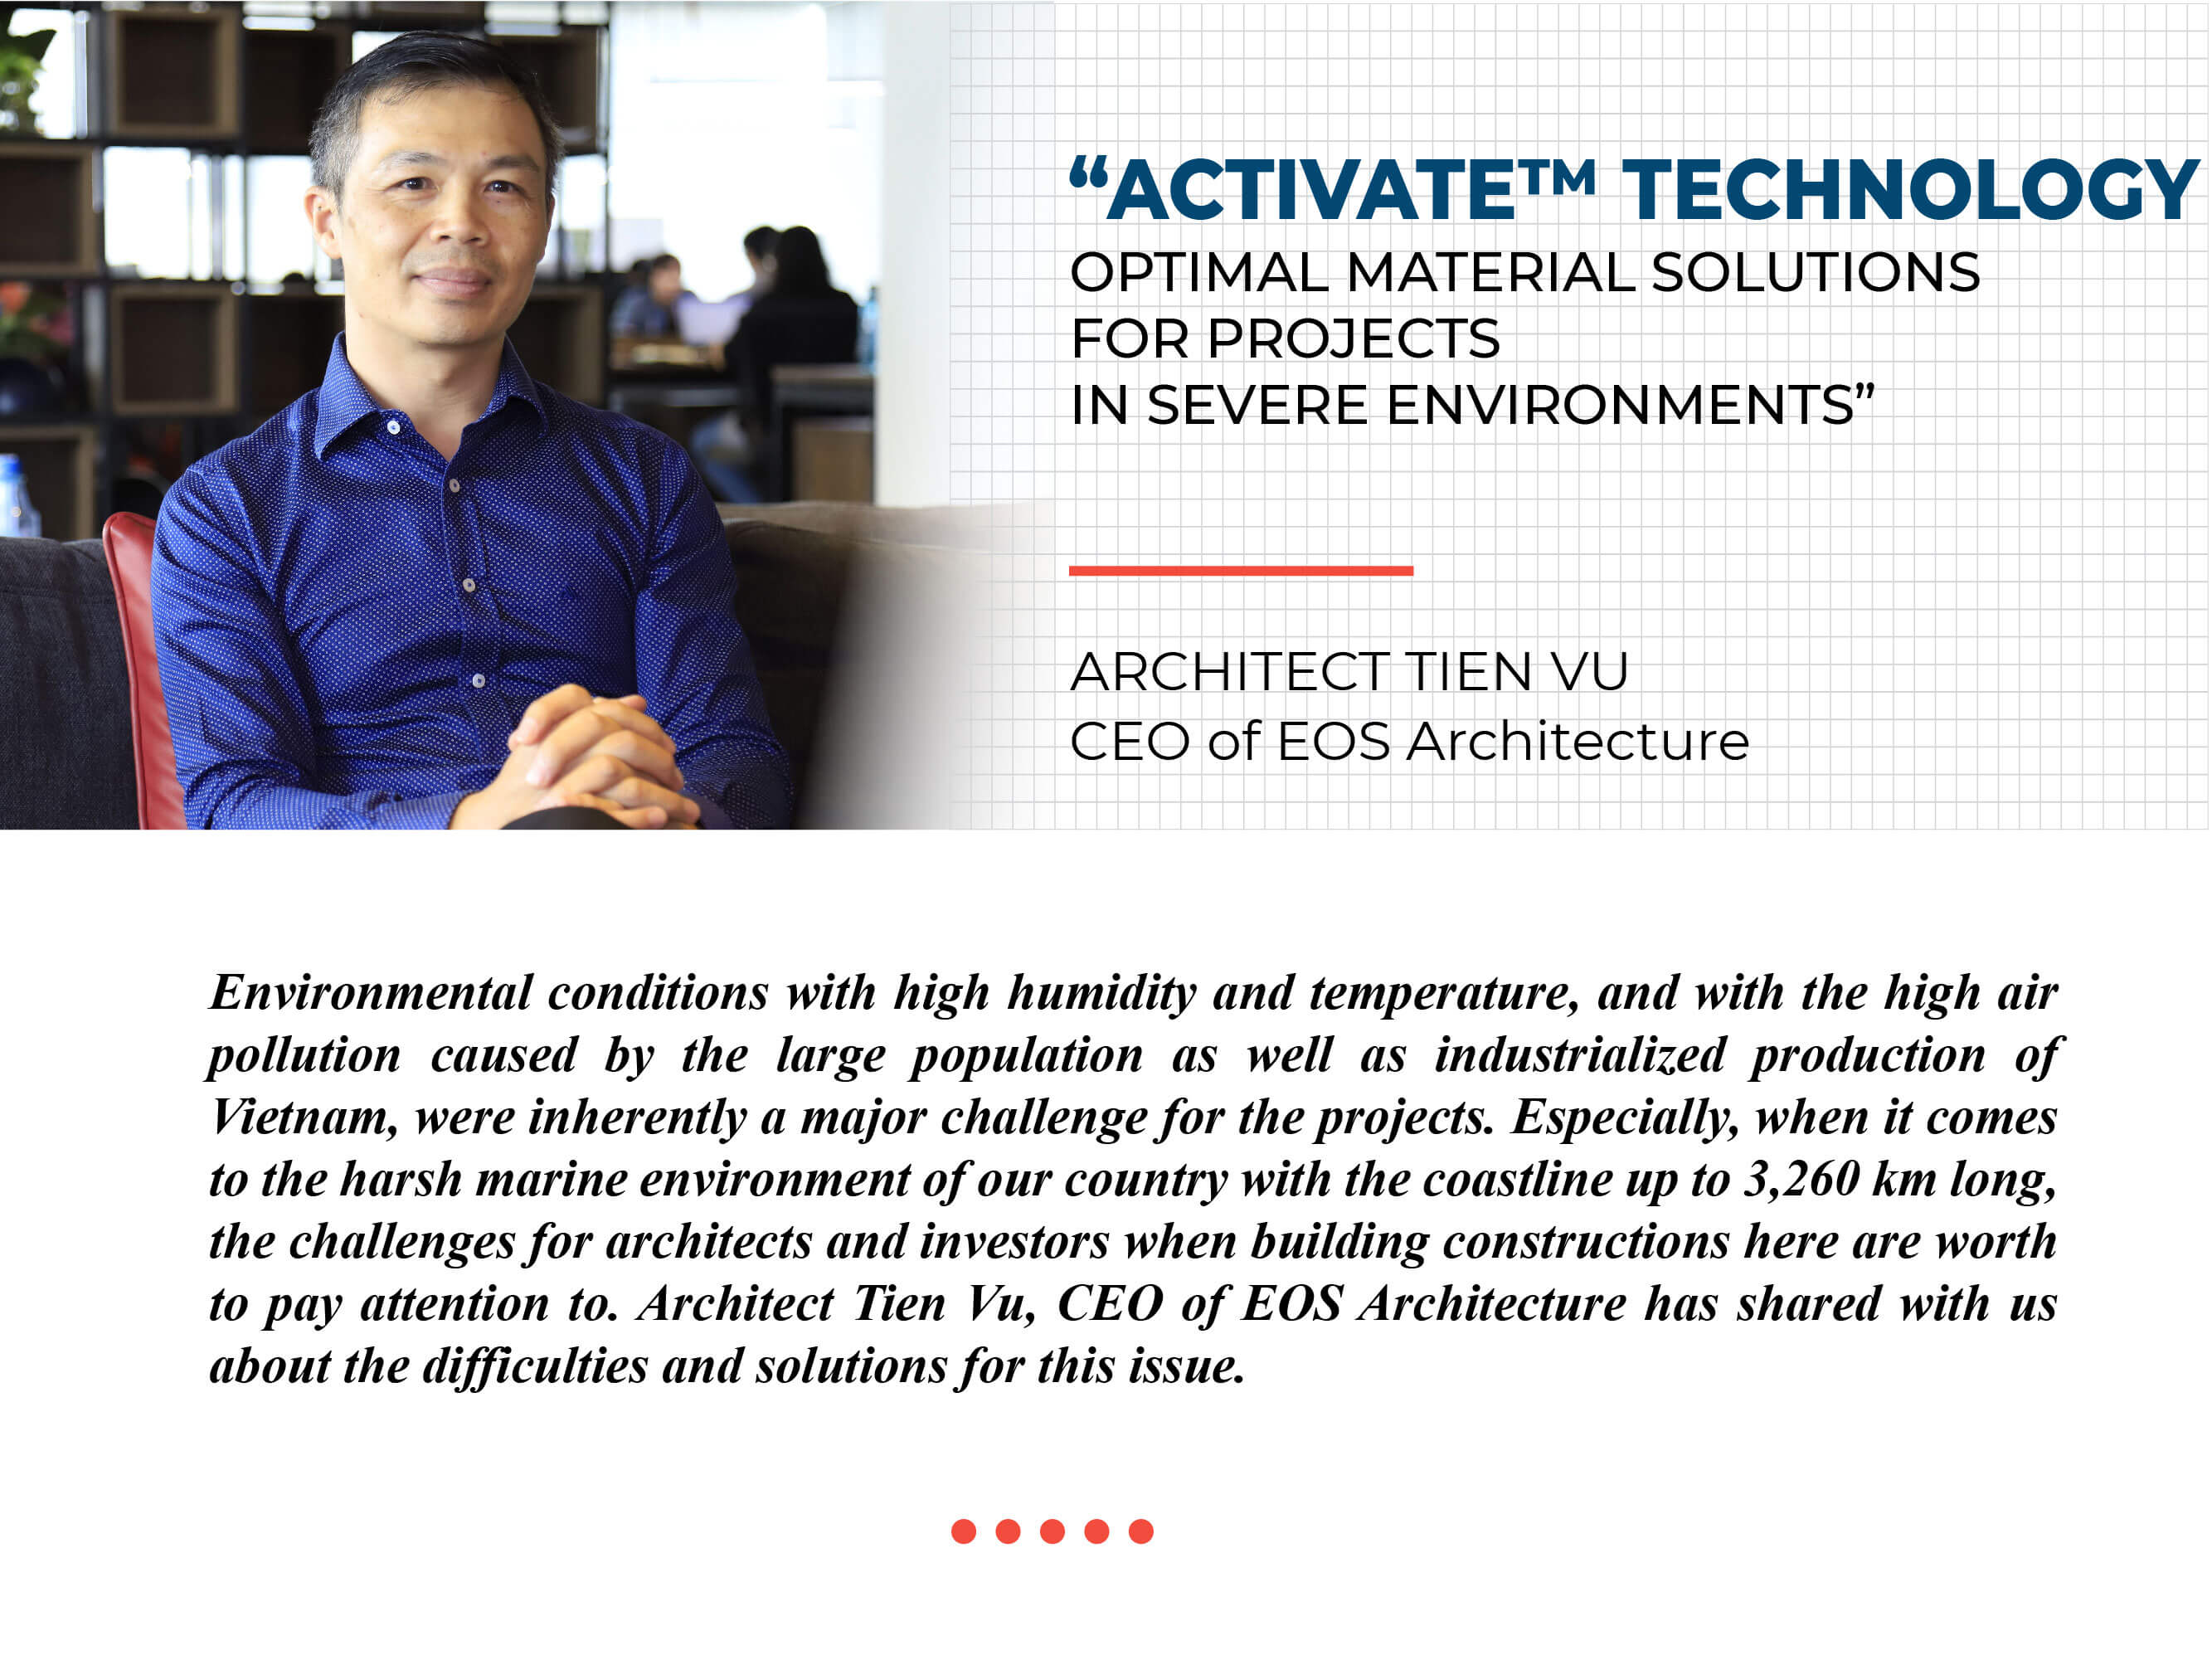 "ACTIVATE™ TECHNOLOGY OPTIMAL MATERIAL SOLUTIONS FOR PROJECTS IN SEVERE ENVIRONMENTS"